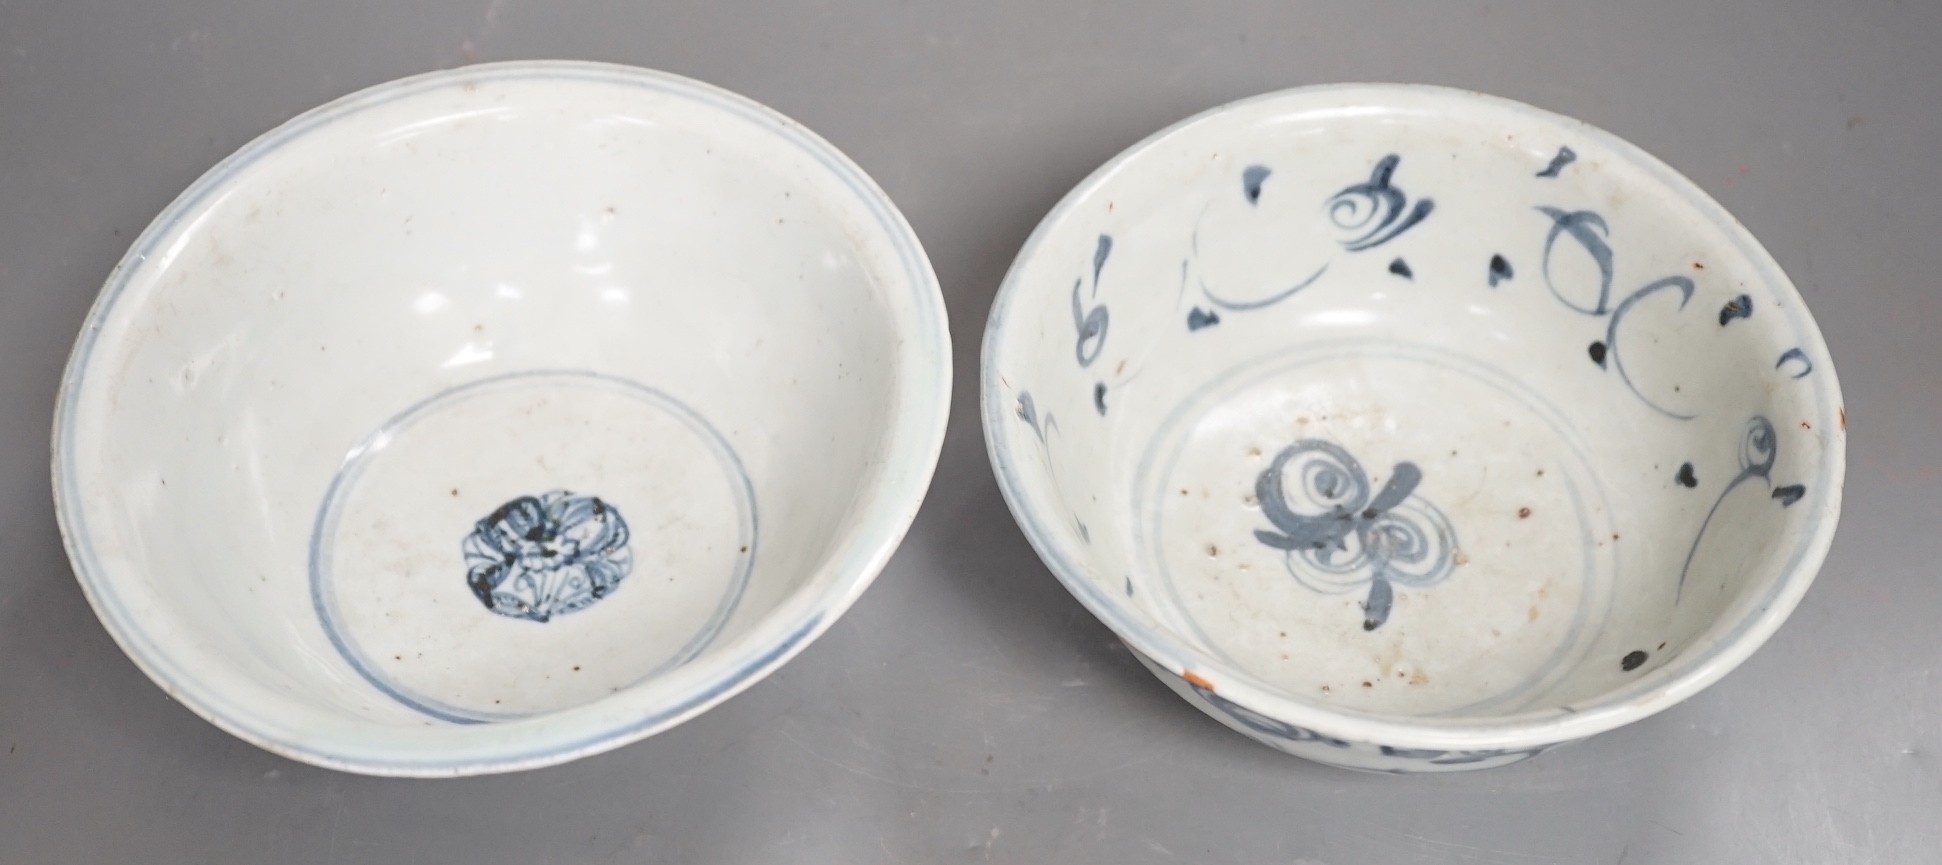 Two Chinese late Ming blue and white bowls, 16th/17th century, painted with flowers and foliage, 14.3 and 15.8cm